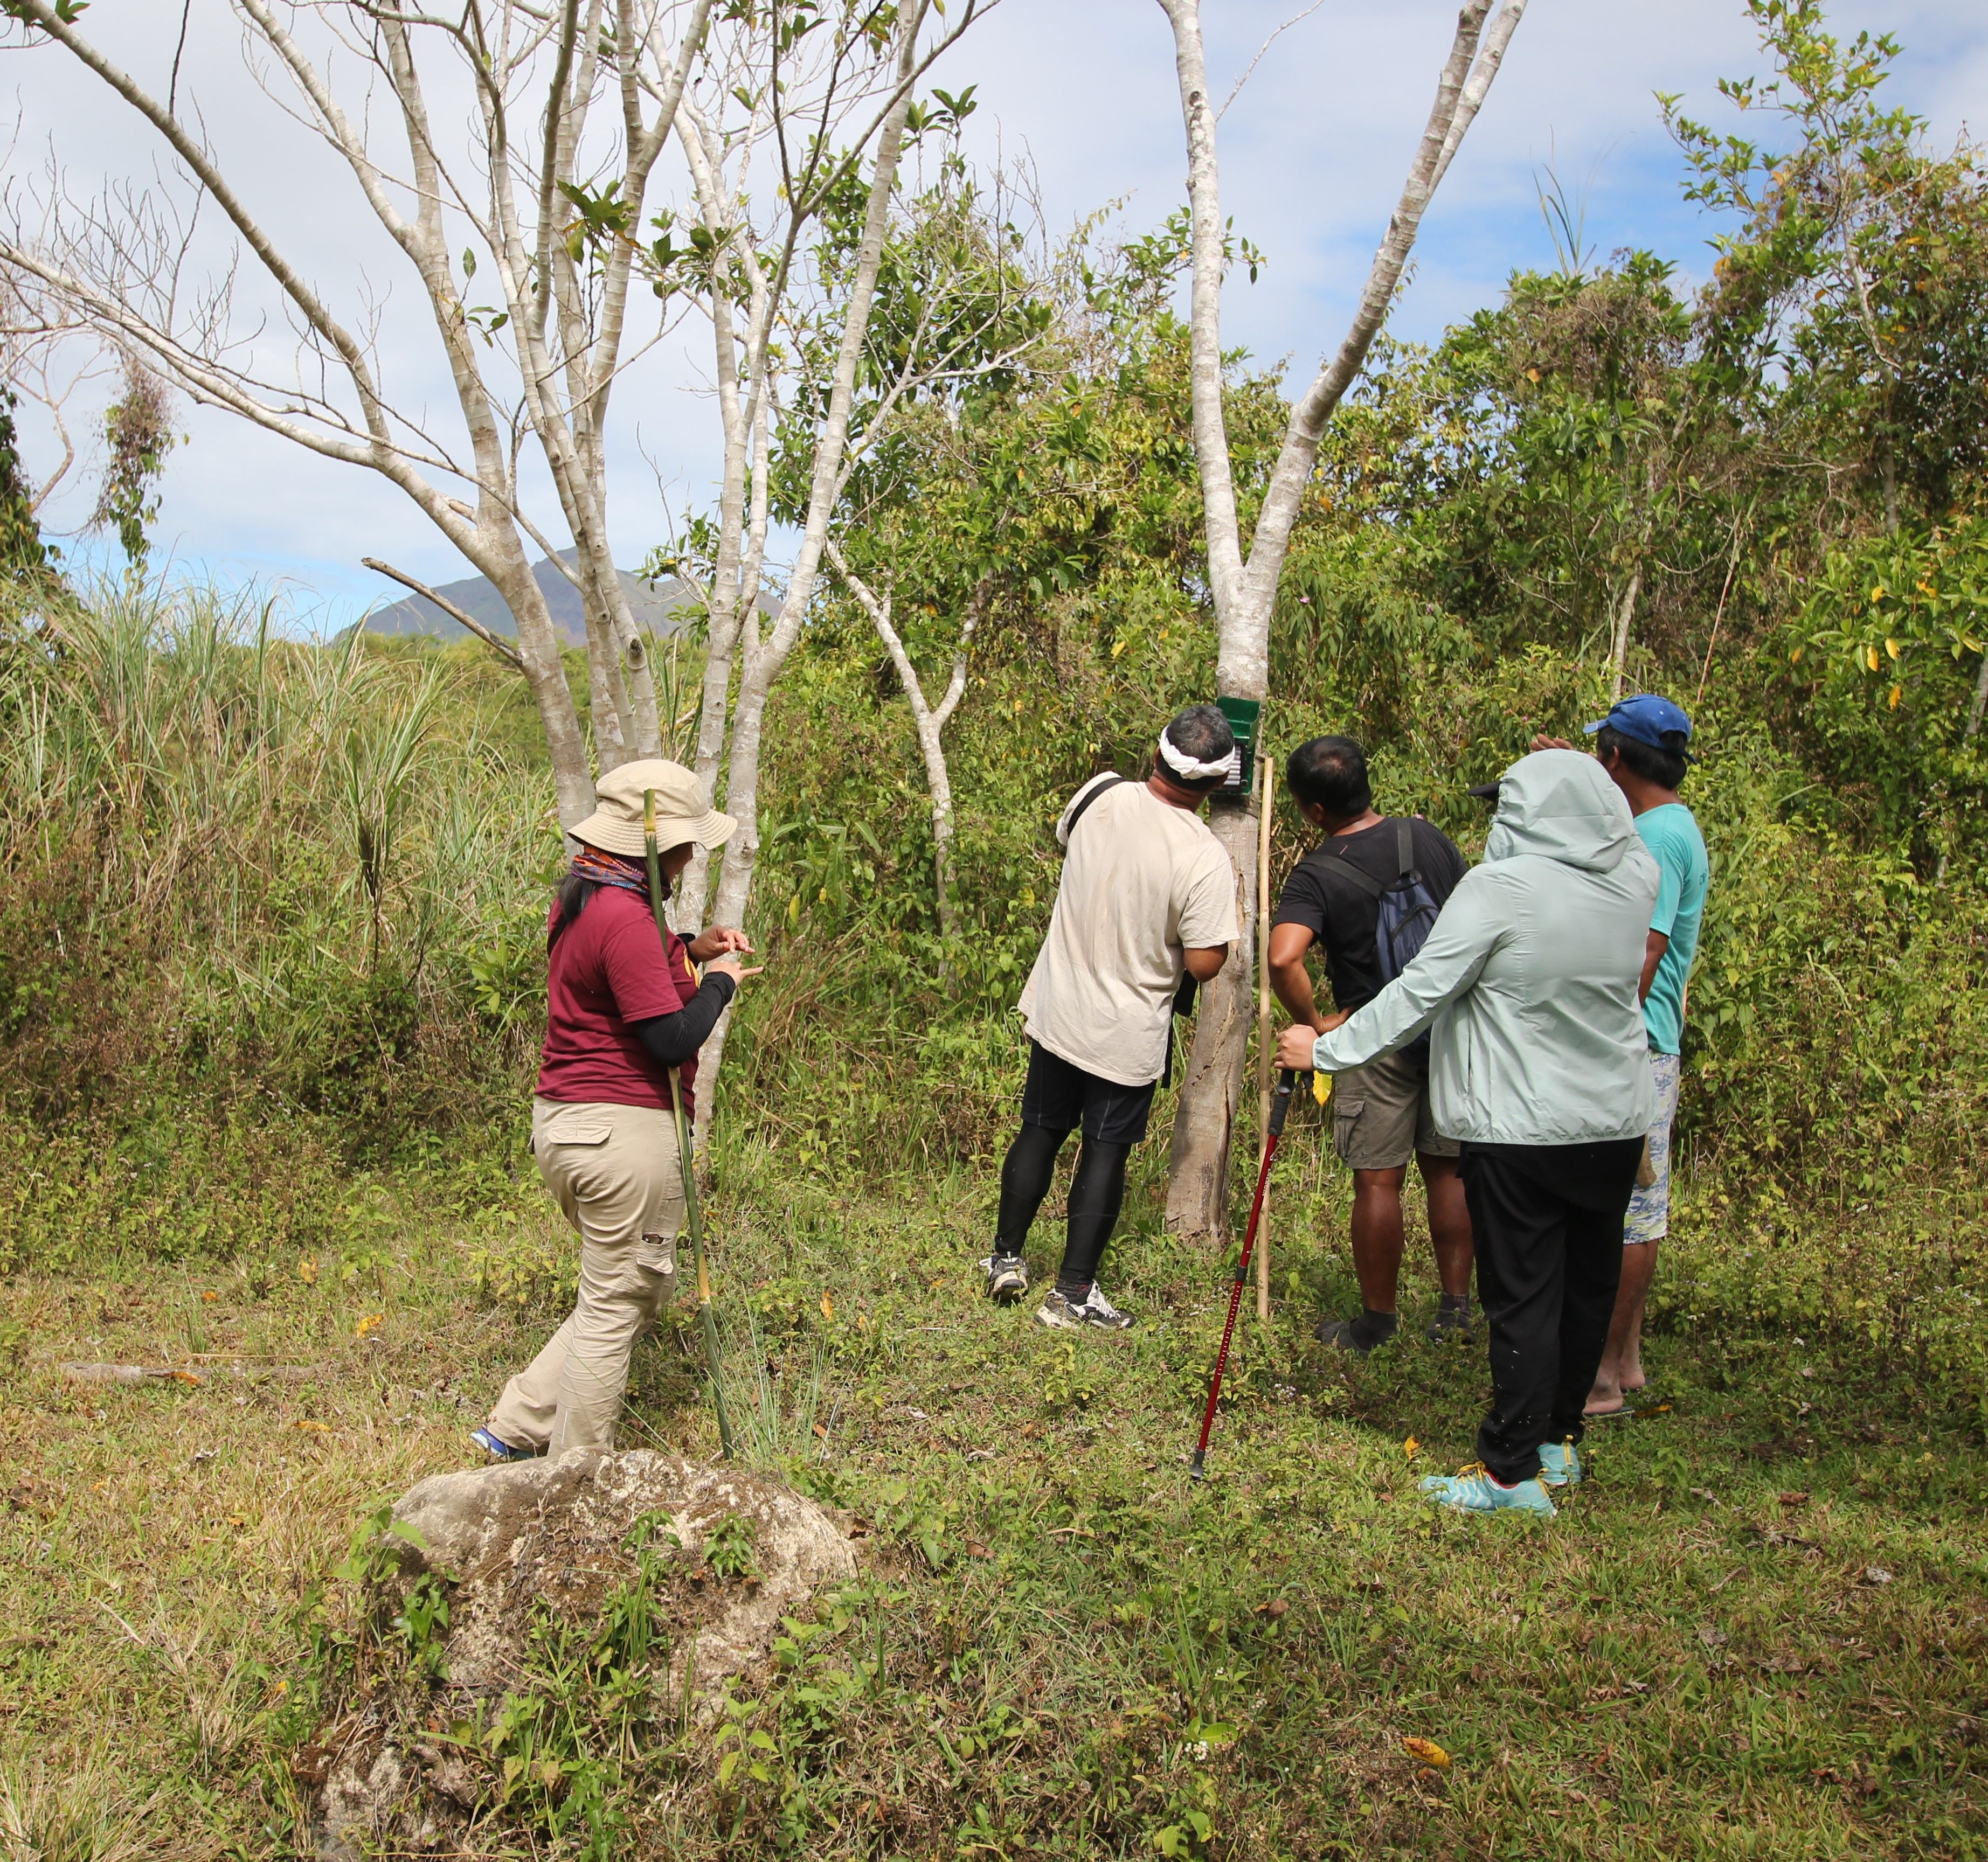 <h1>Sun Life Foundation Visits Mindoro</h1>
<p>Conservation efforts continue in Mindoro with the support of Sun Life Financial Philippines – Foundation.</p>
<p style="text-align: right;"><a href="https://support.wwf.org.ph/resource-center/story-archives-2019/sun-life-visits-mindoro/" target="_blank">Read More &gt;</a></p>